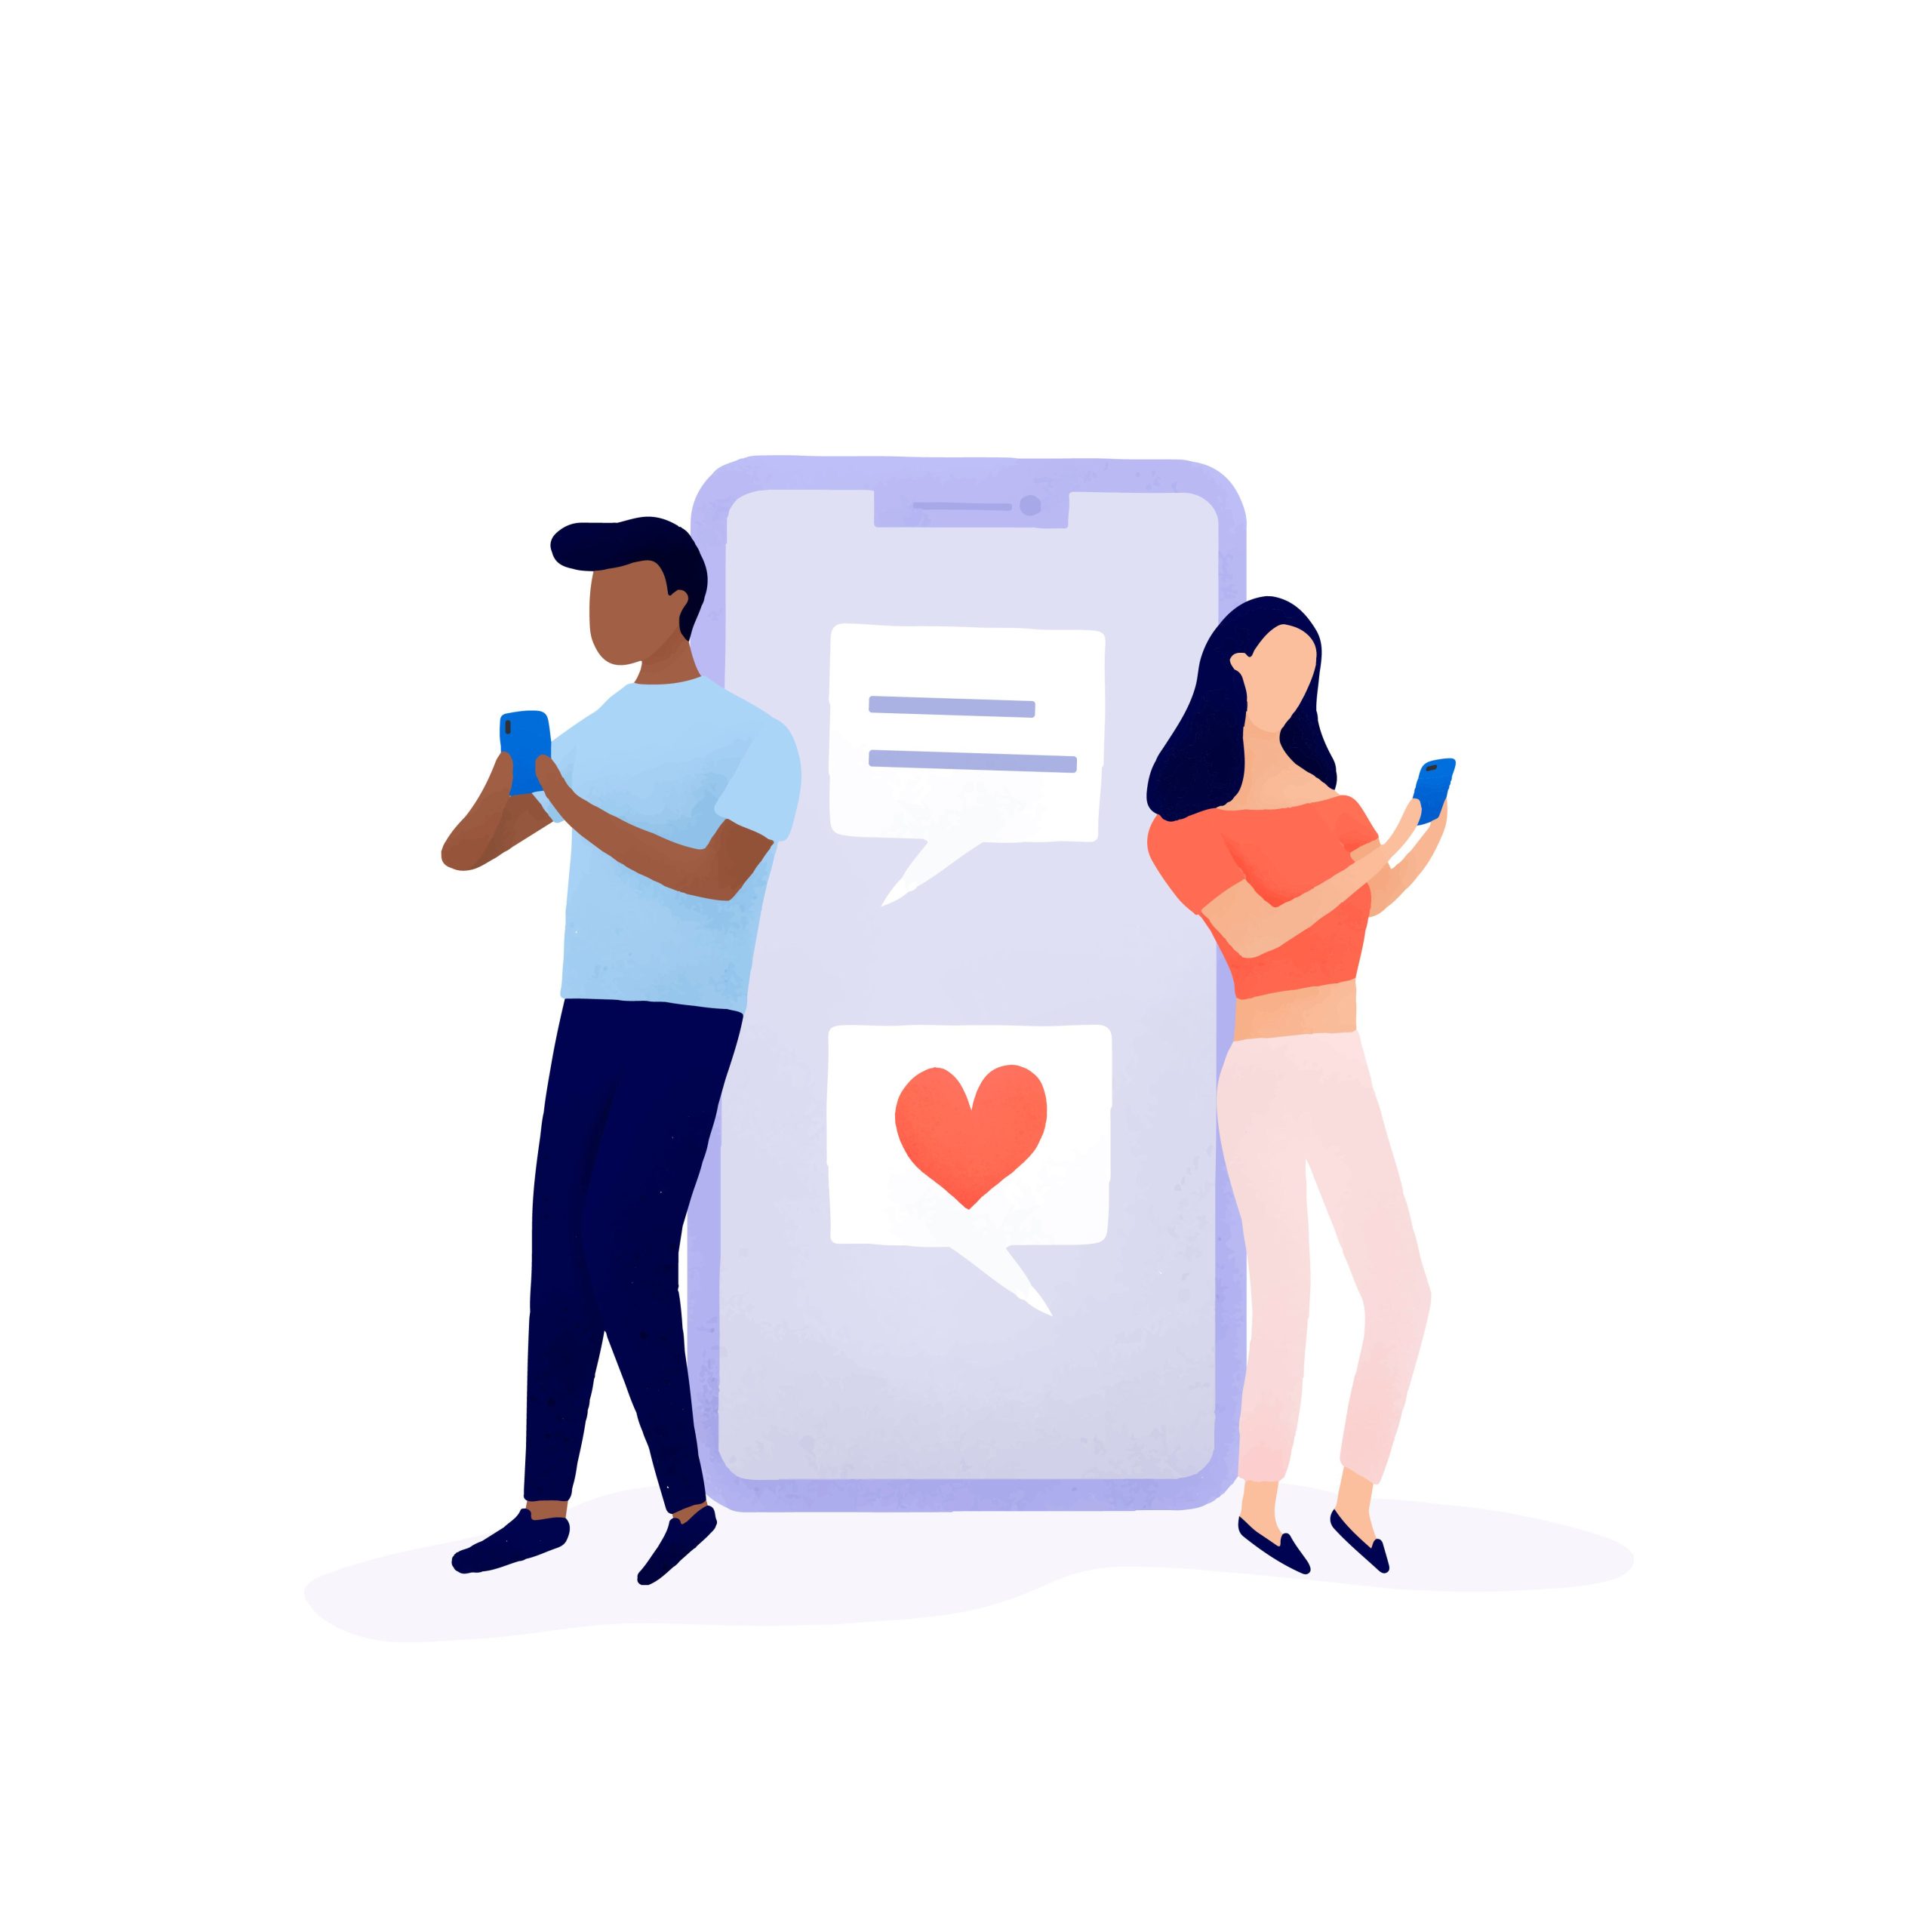 Technology Stack Can be Used for Developing a Dating App like Hinge | BigMach